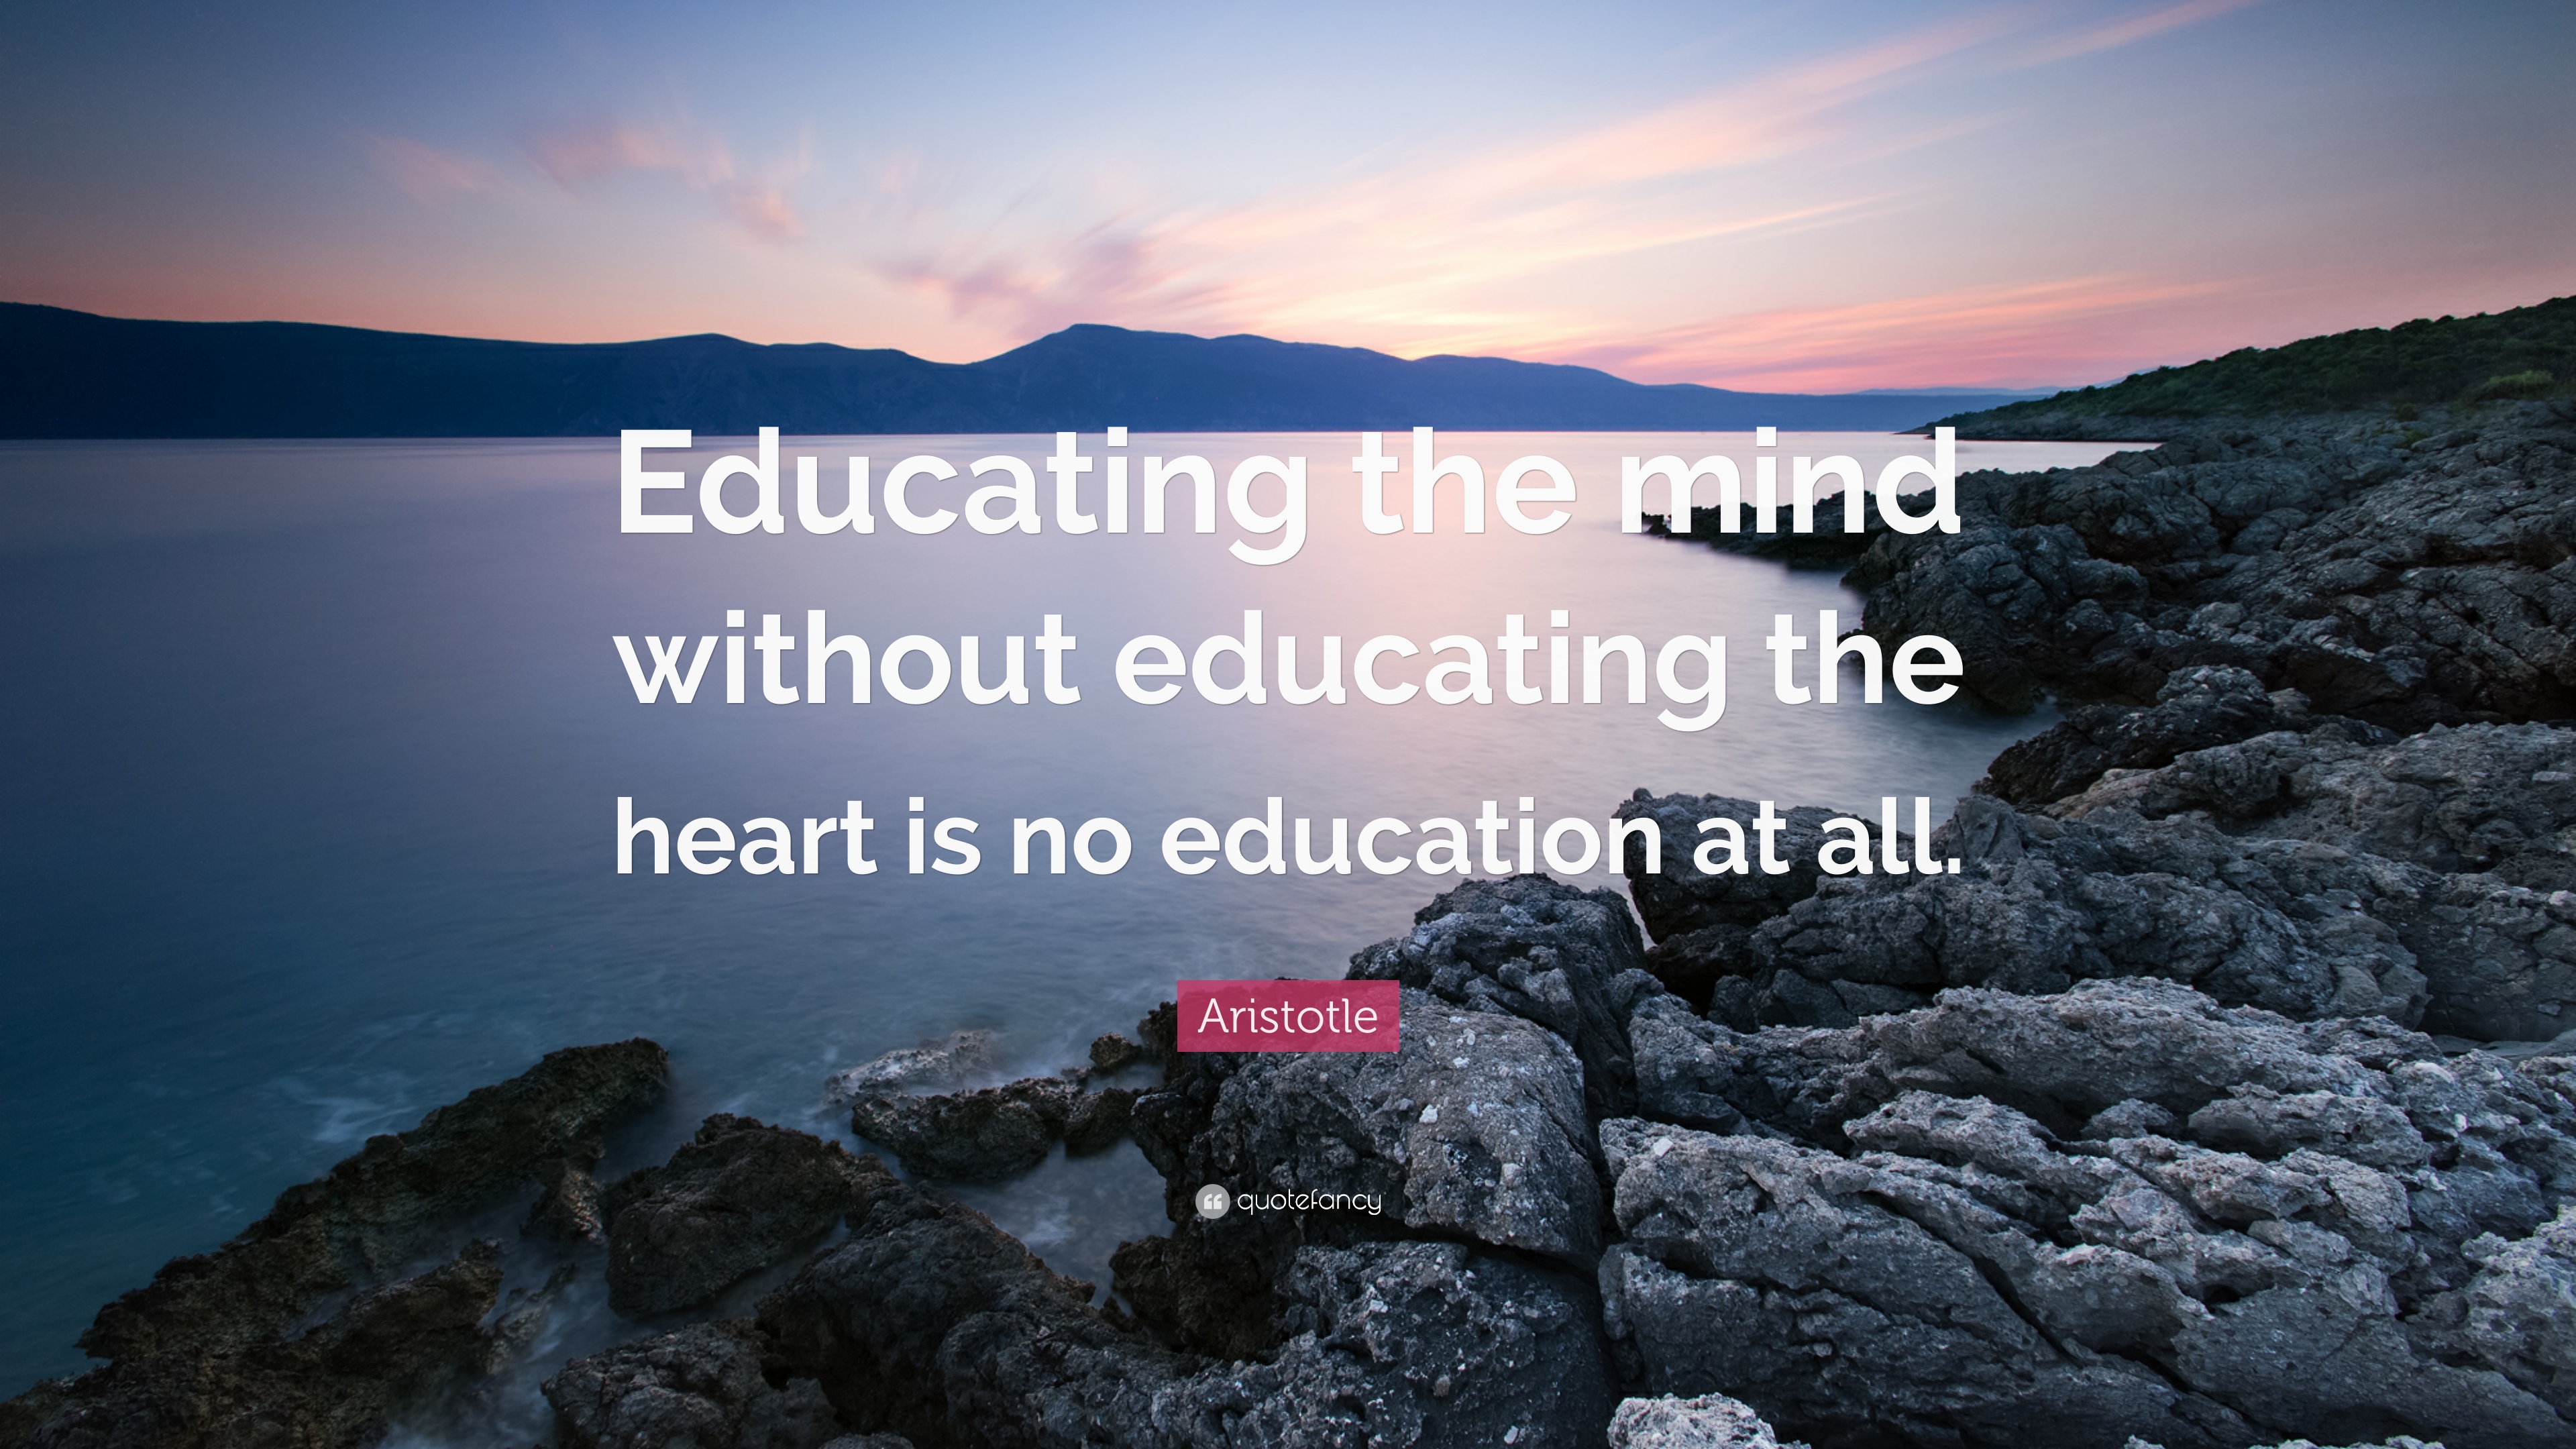 Aristotle Quote: “Educating the mind without educating the heart is